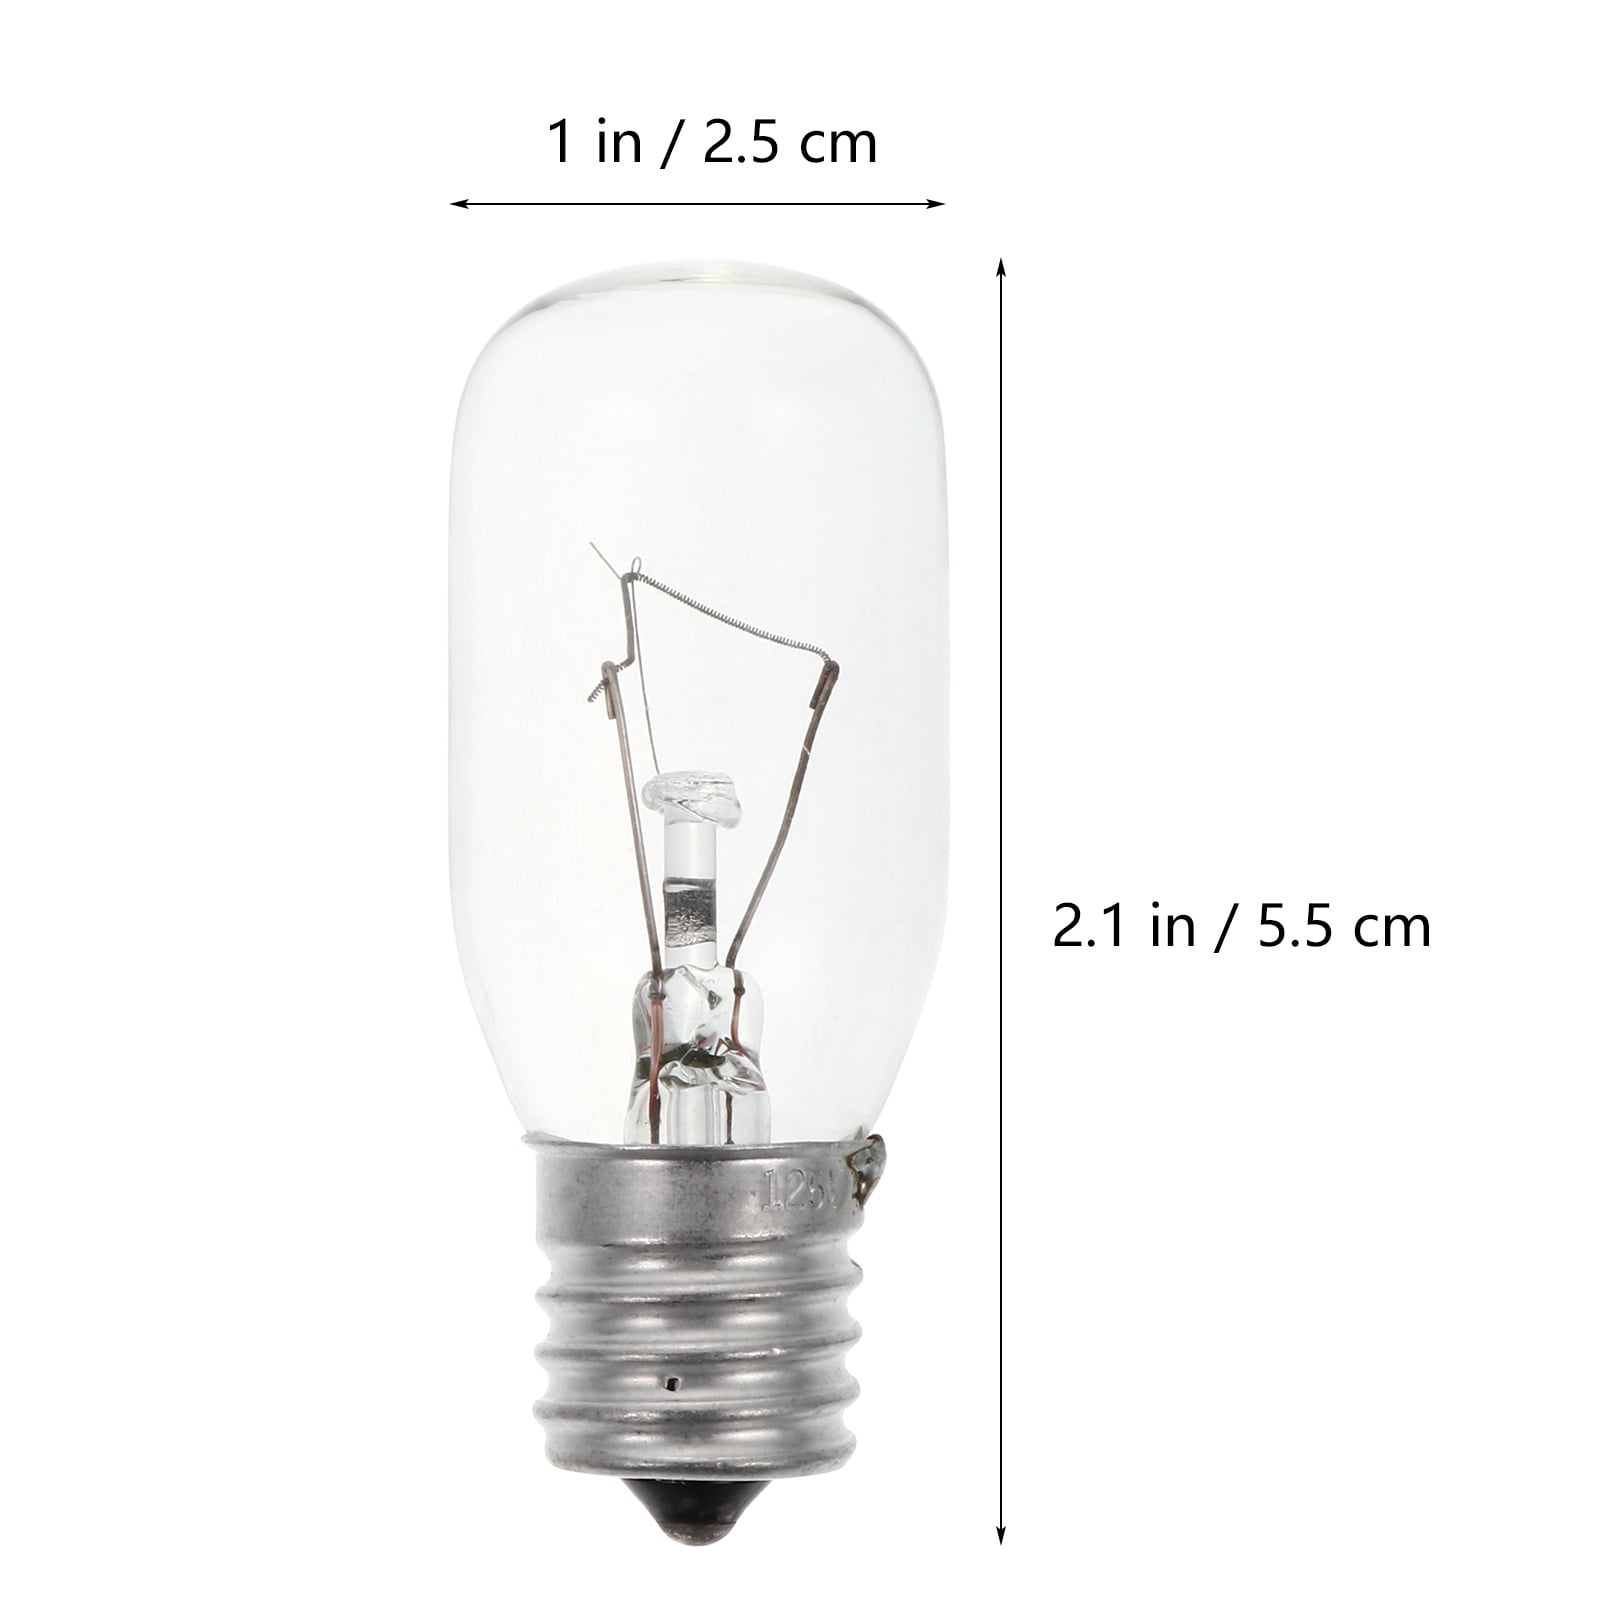 klif de studie Ambacht Bulb Light Microwave Oven Lamp Lamps Heat Resistant Toaster Bulbs E17 Clear  Replacement Appliance Led Refrigerator - Walmart.com